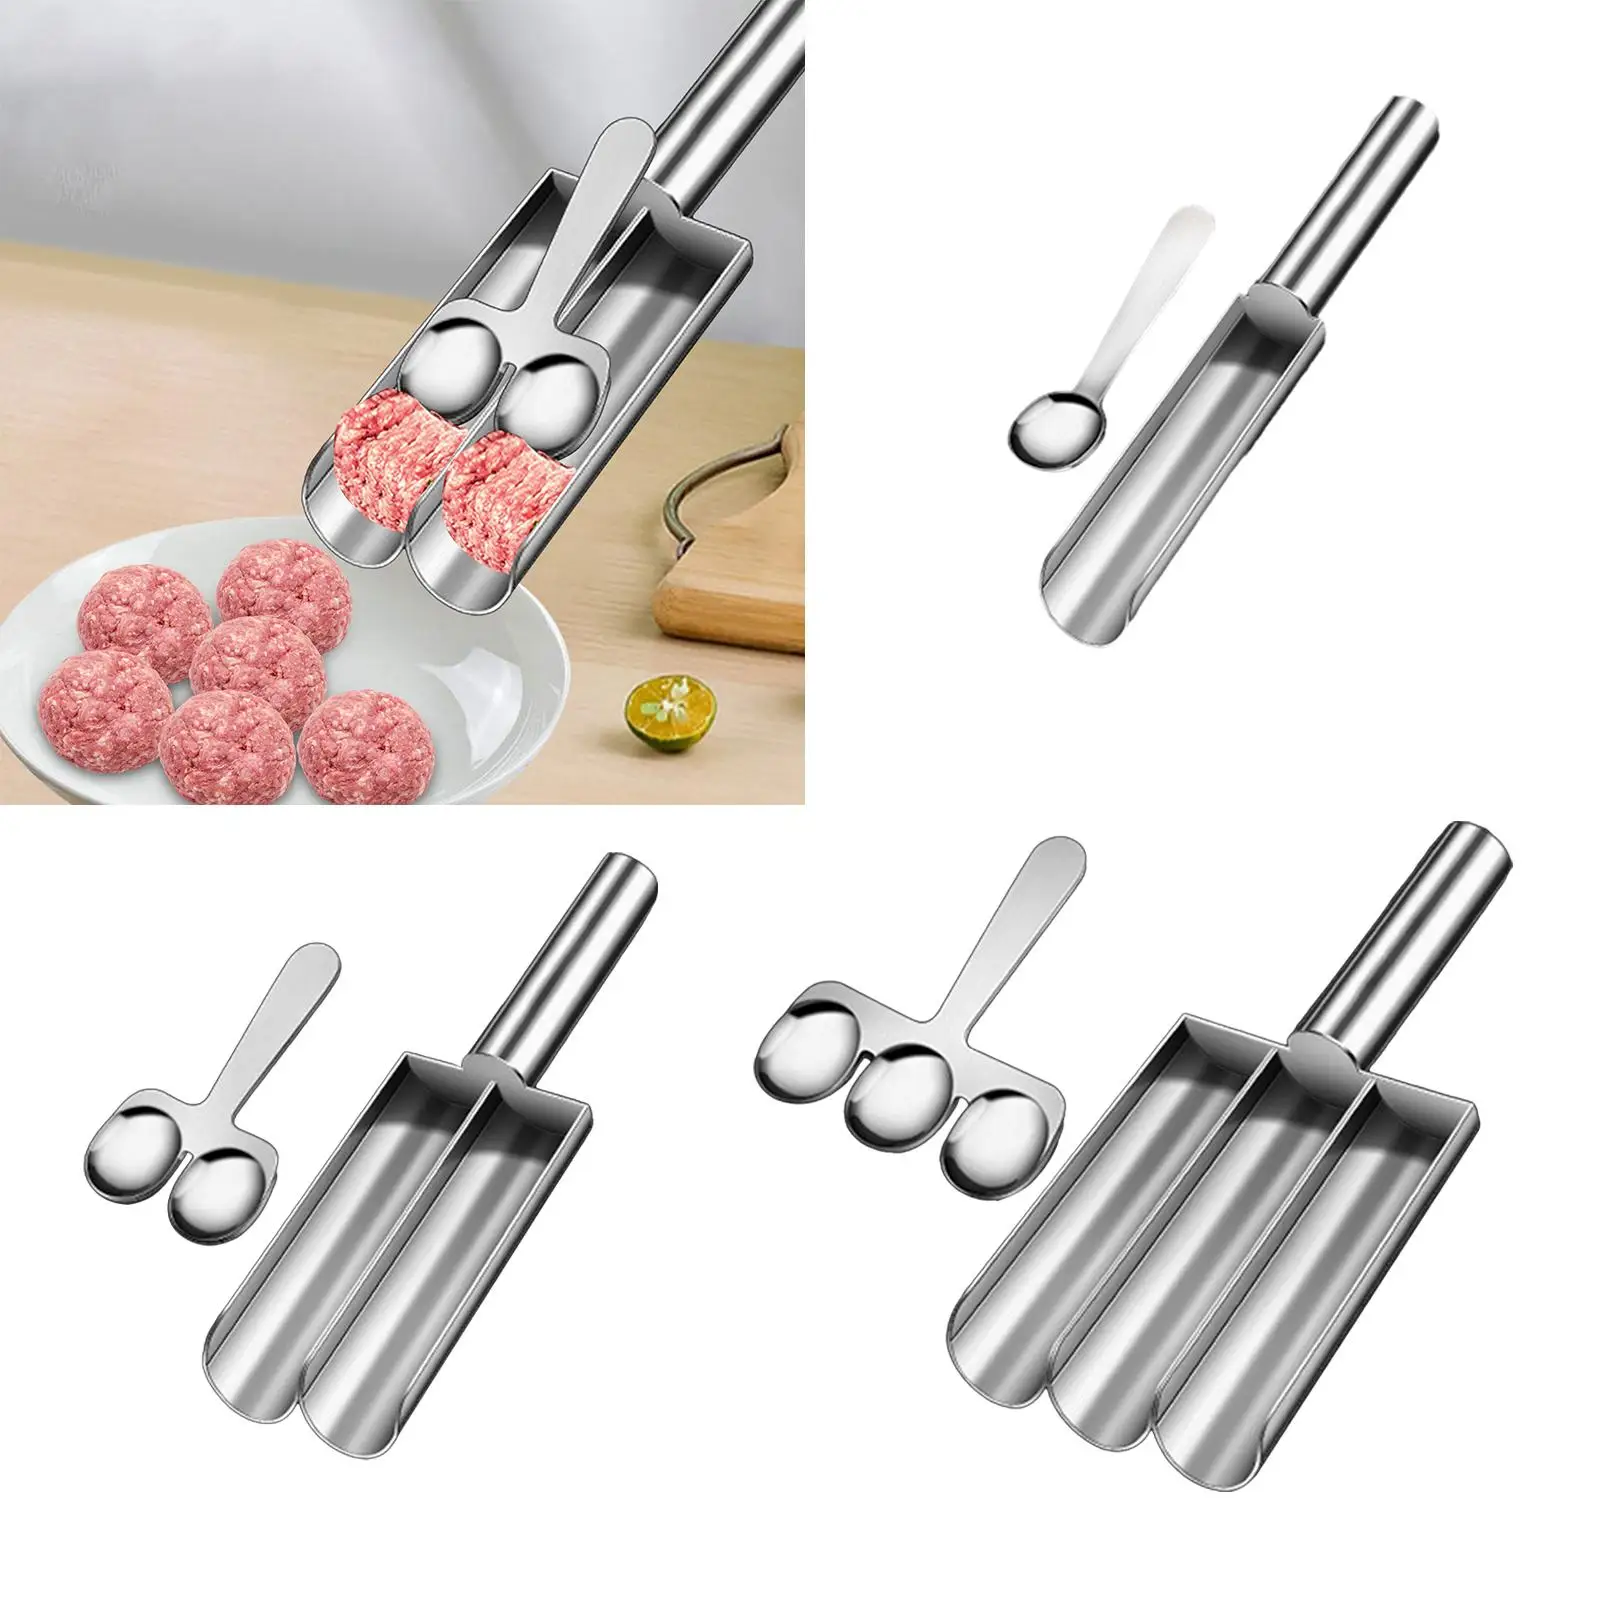 Meatball Maker Portable Multipurpose for Kitchen Hotels Beef Meat Ball